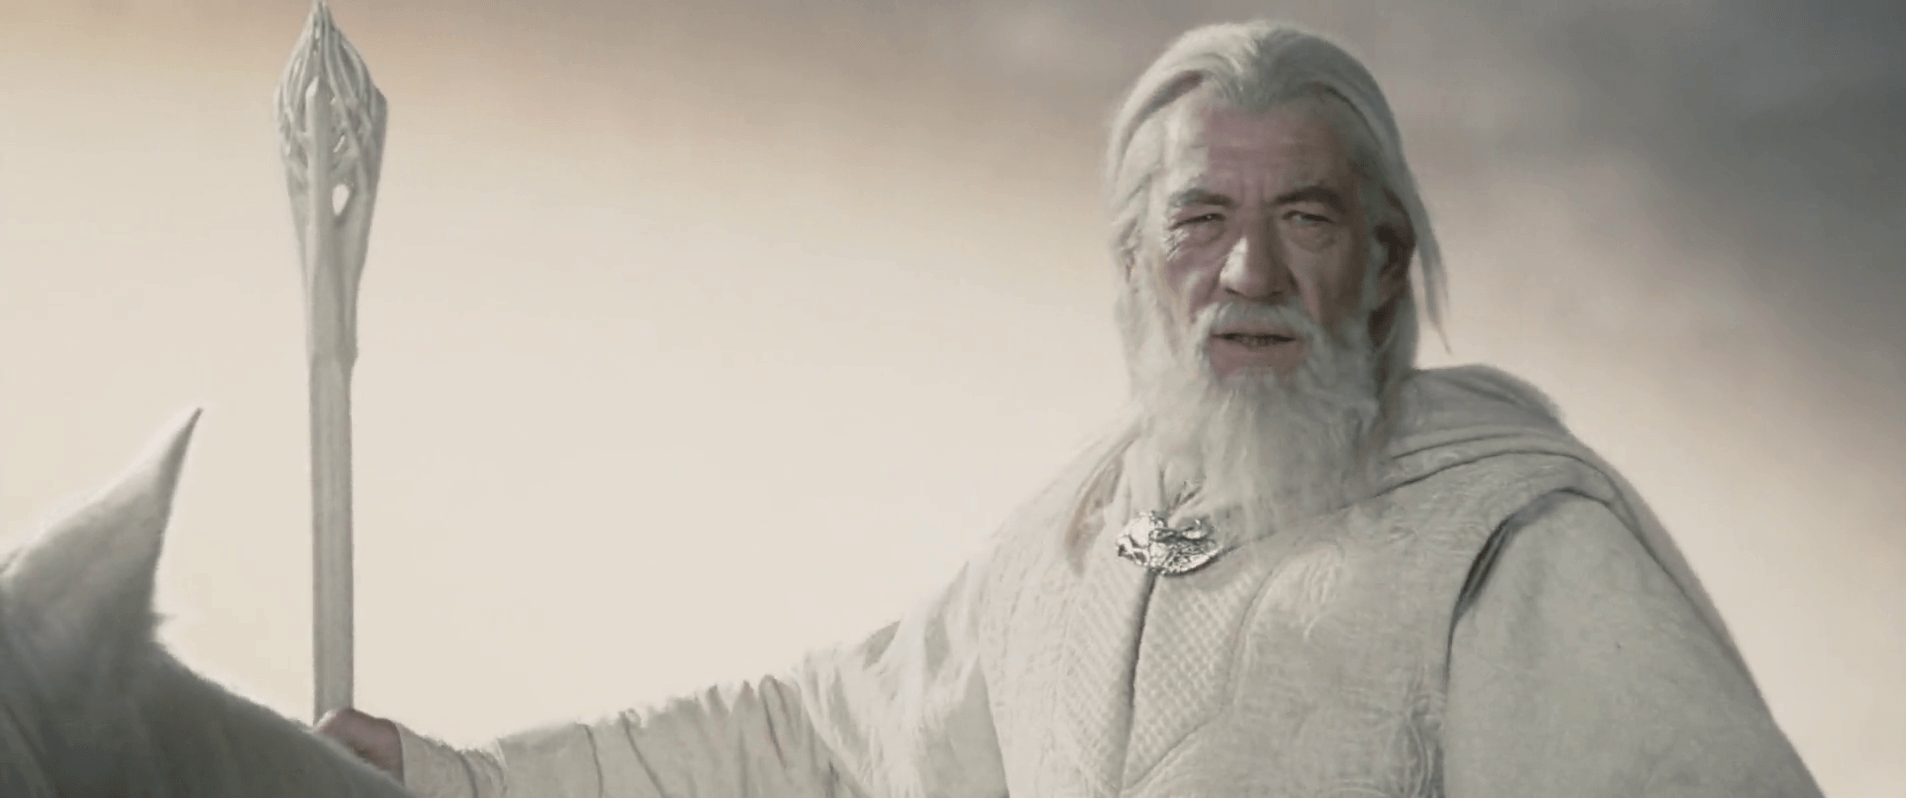 How Gandalf The Grey & White Are Different From Each Other